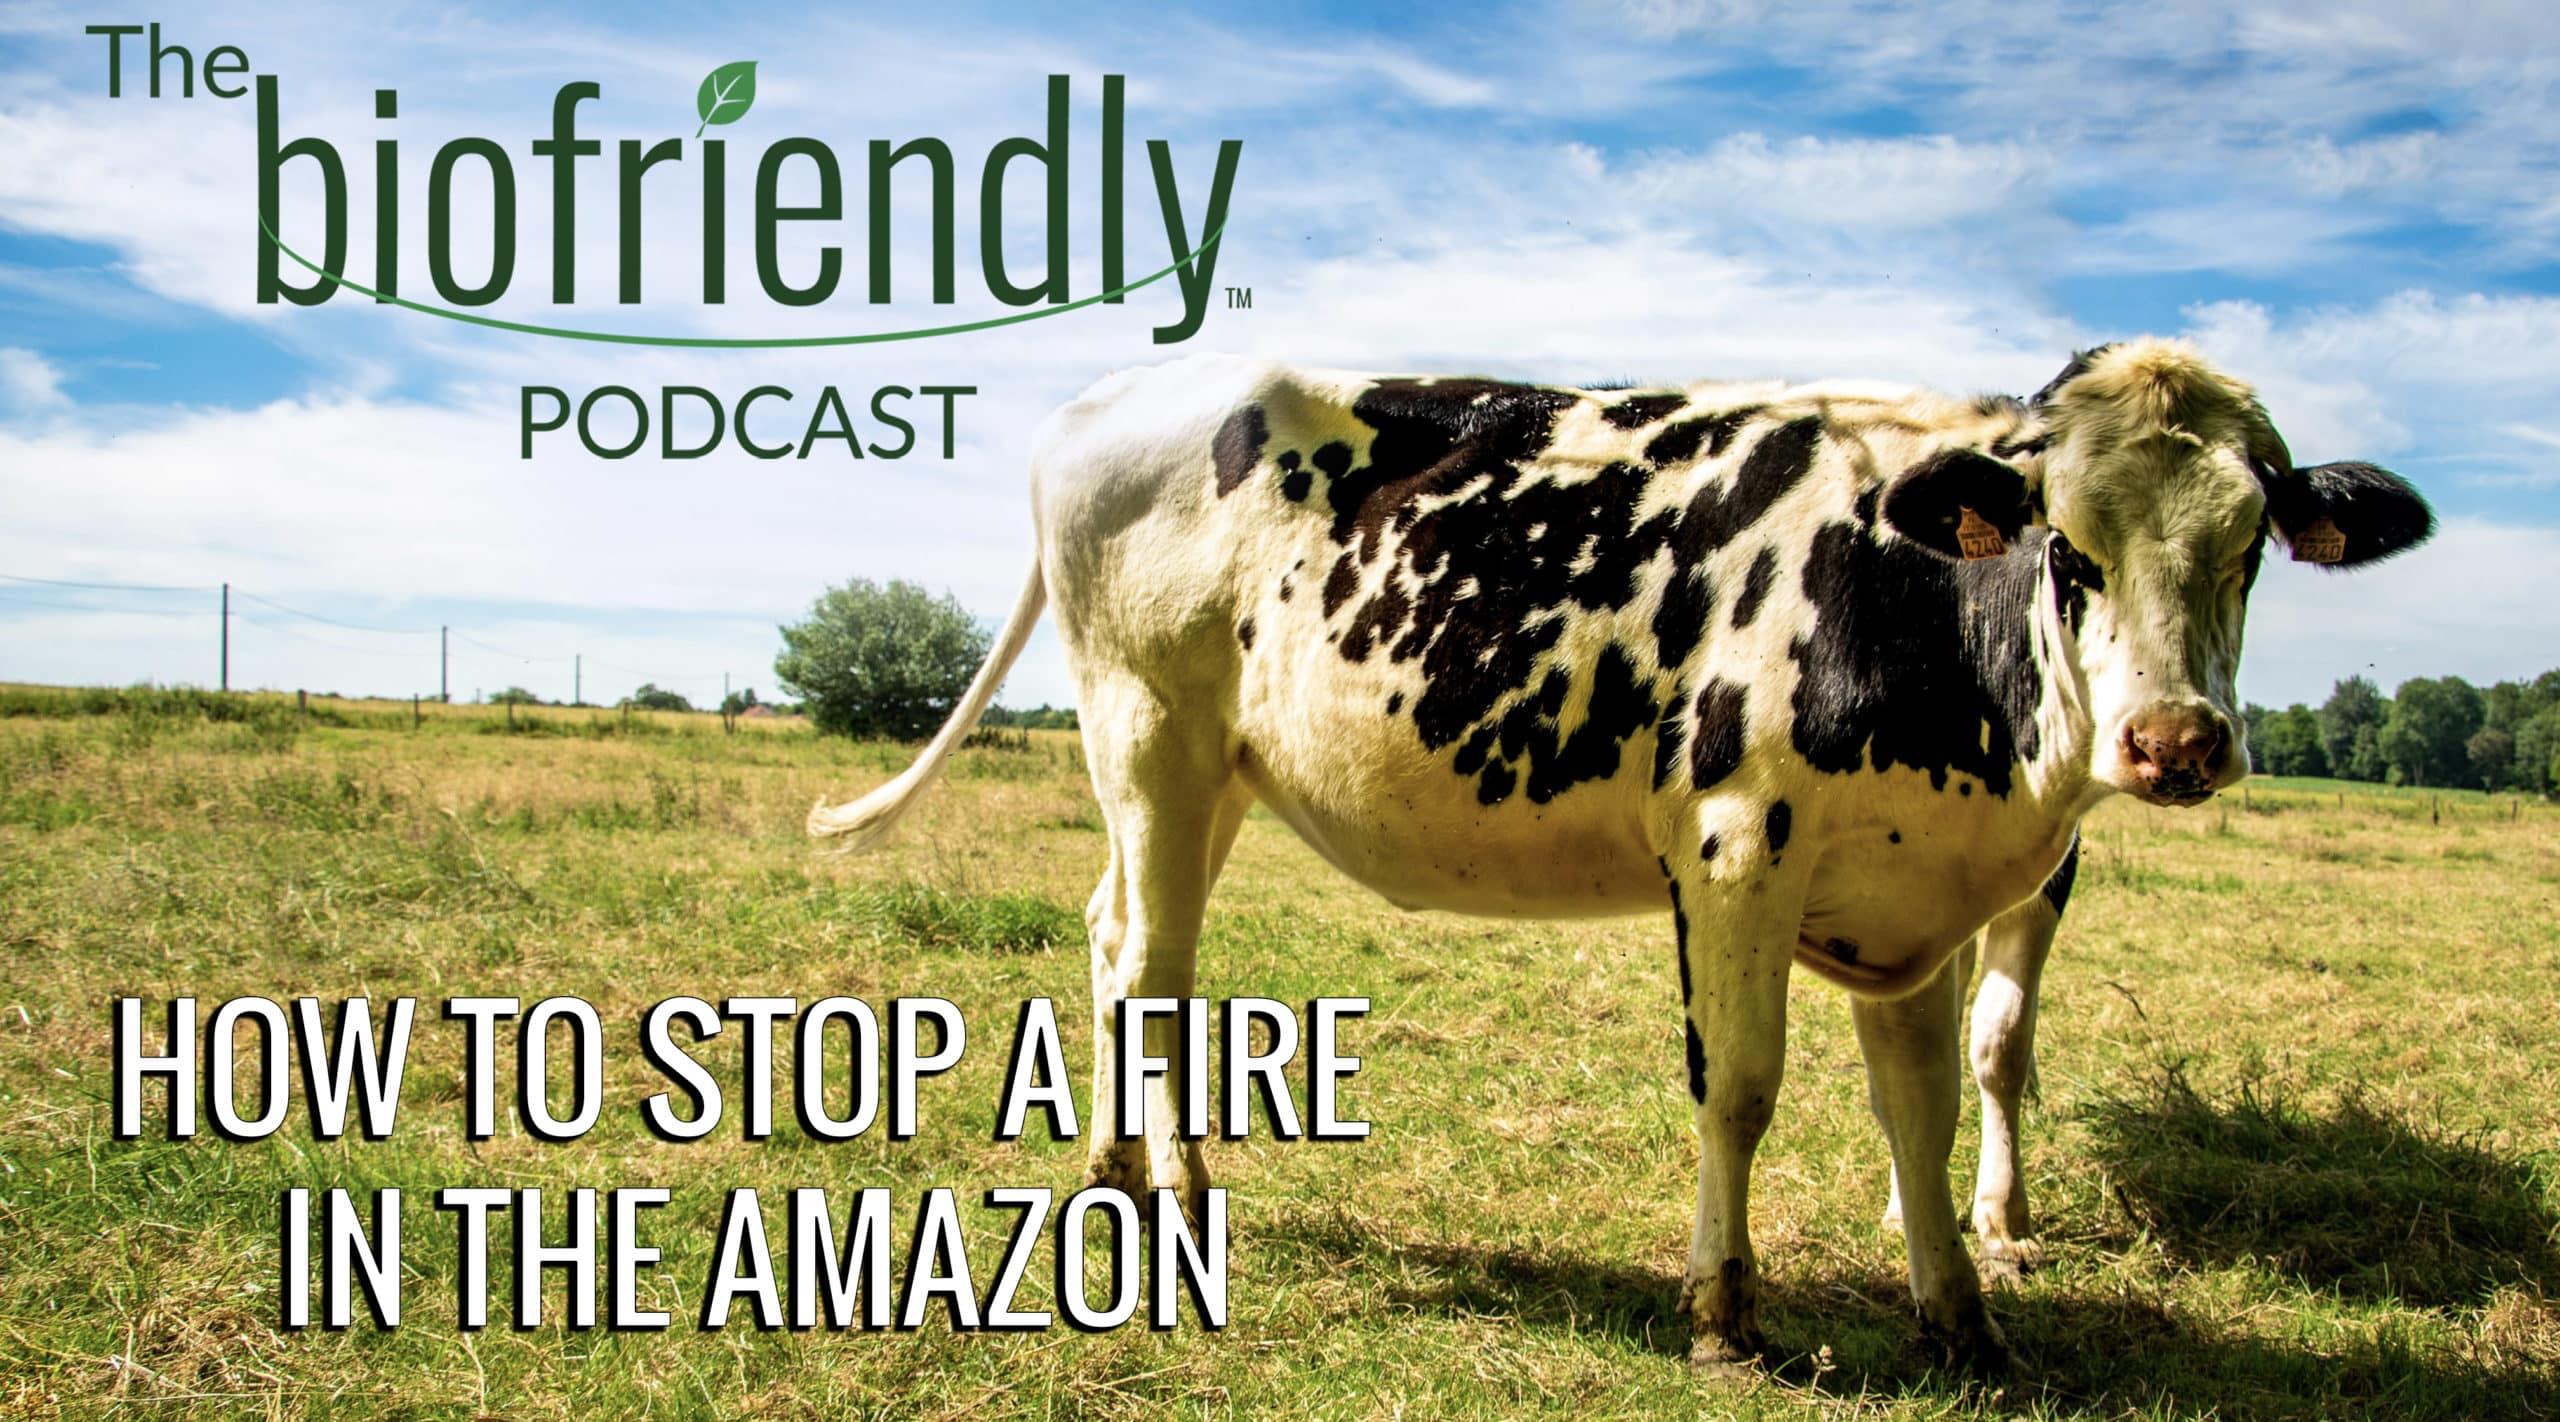 The Biofriendly Podcast - Episode 29 - How To Stop A Fire In The Amazon